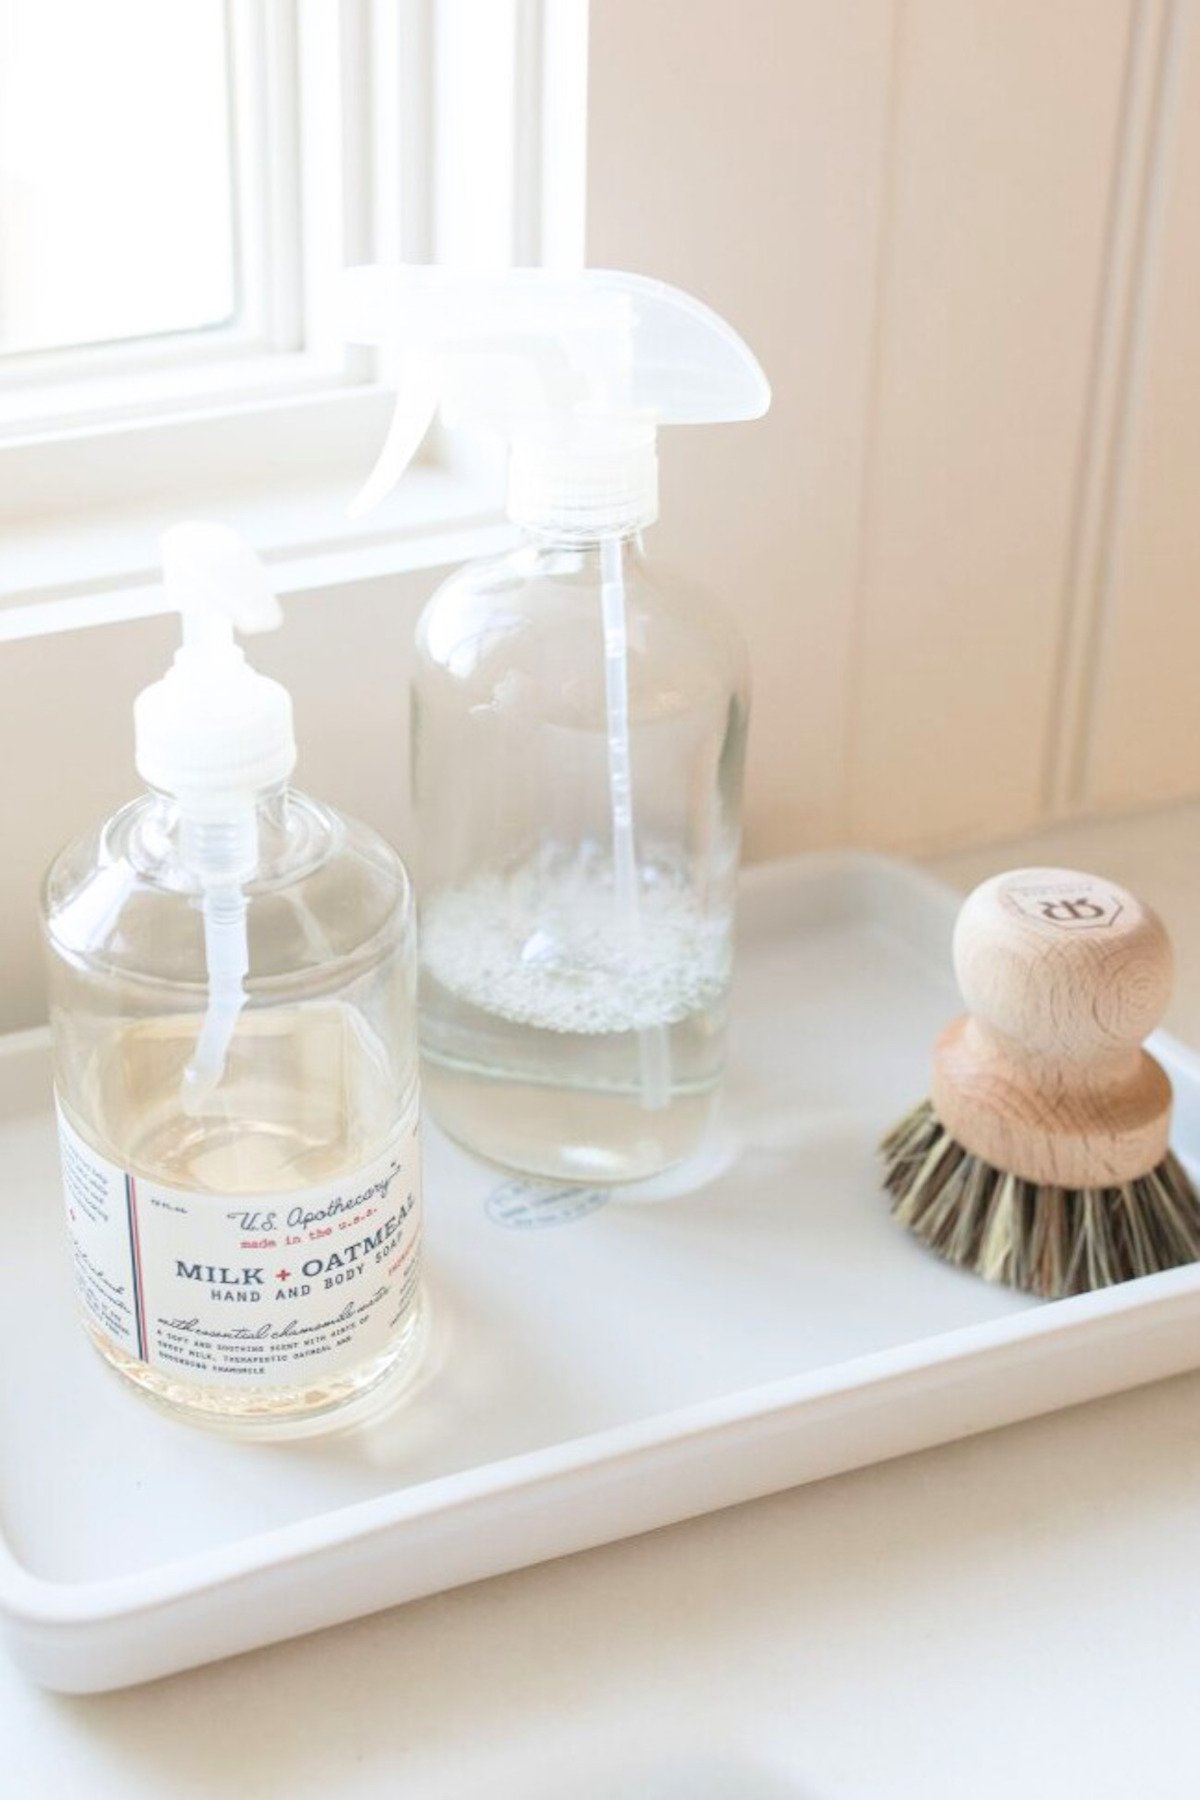 A white tray with bottles of liquid and a brush, perfect for under sink storage